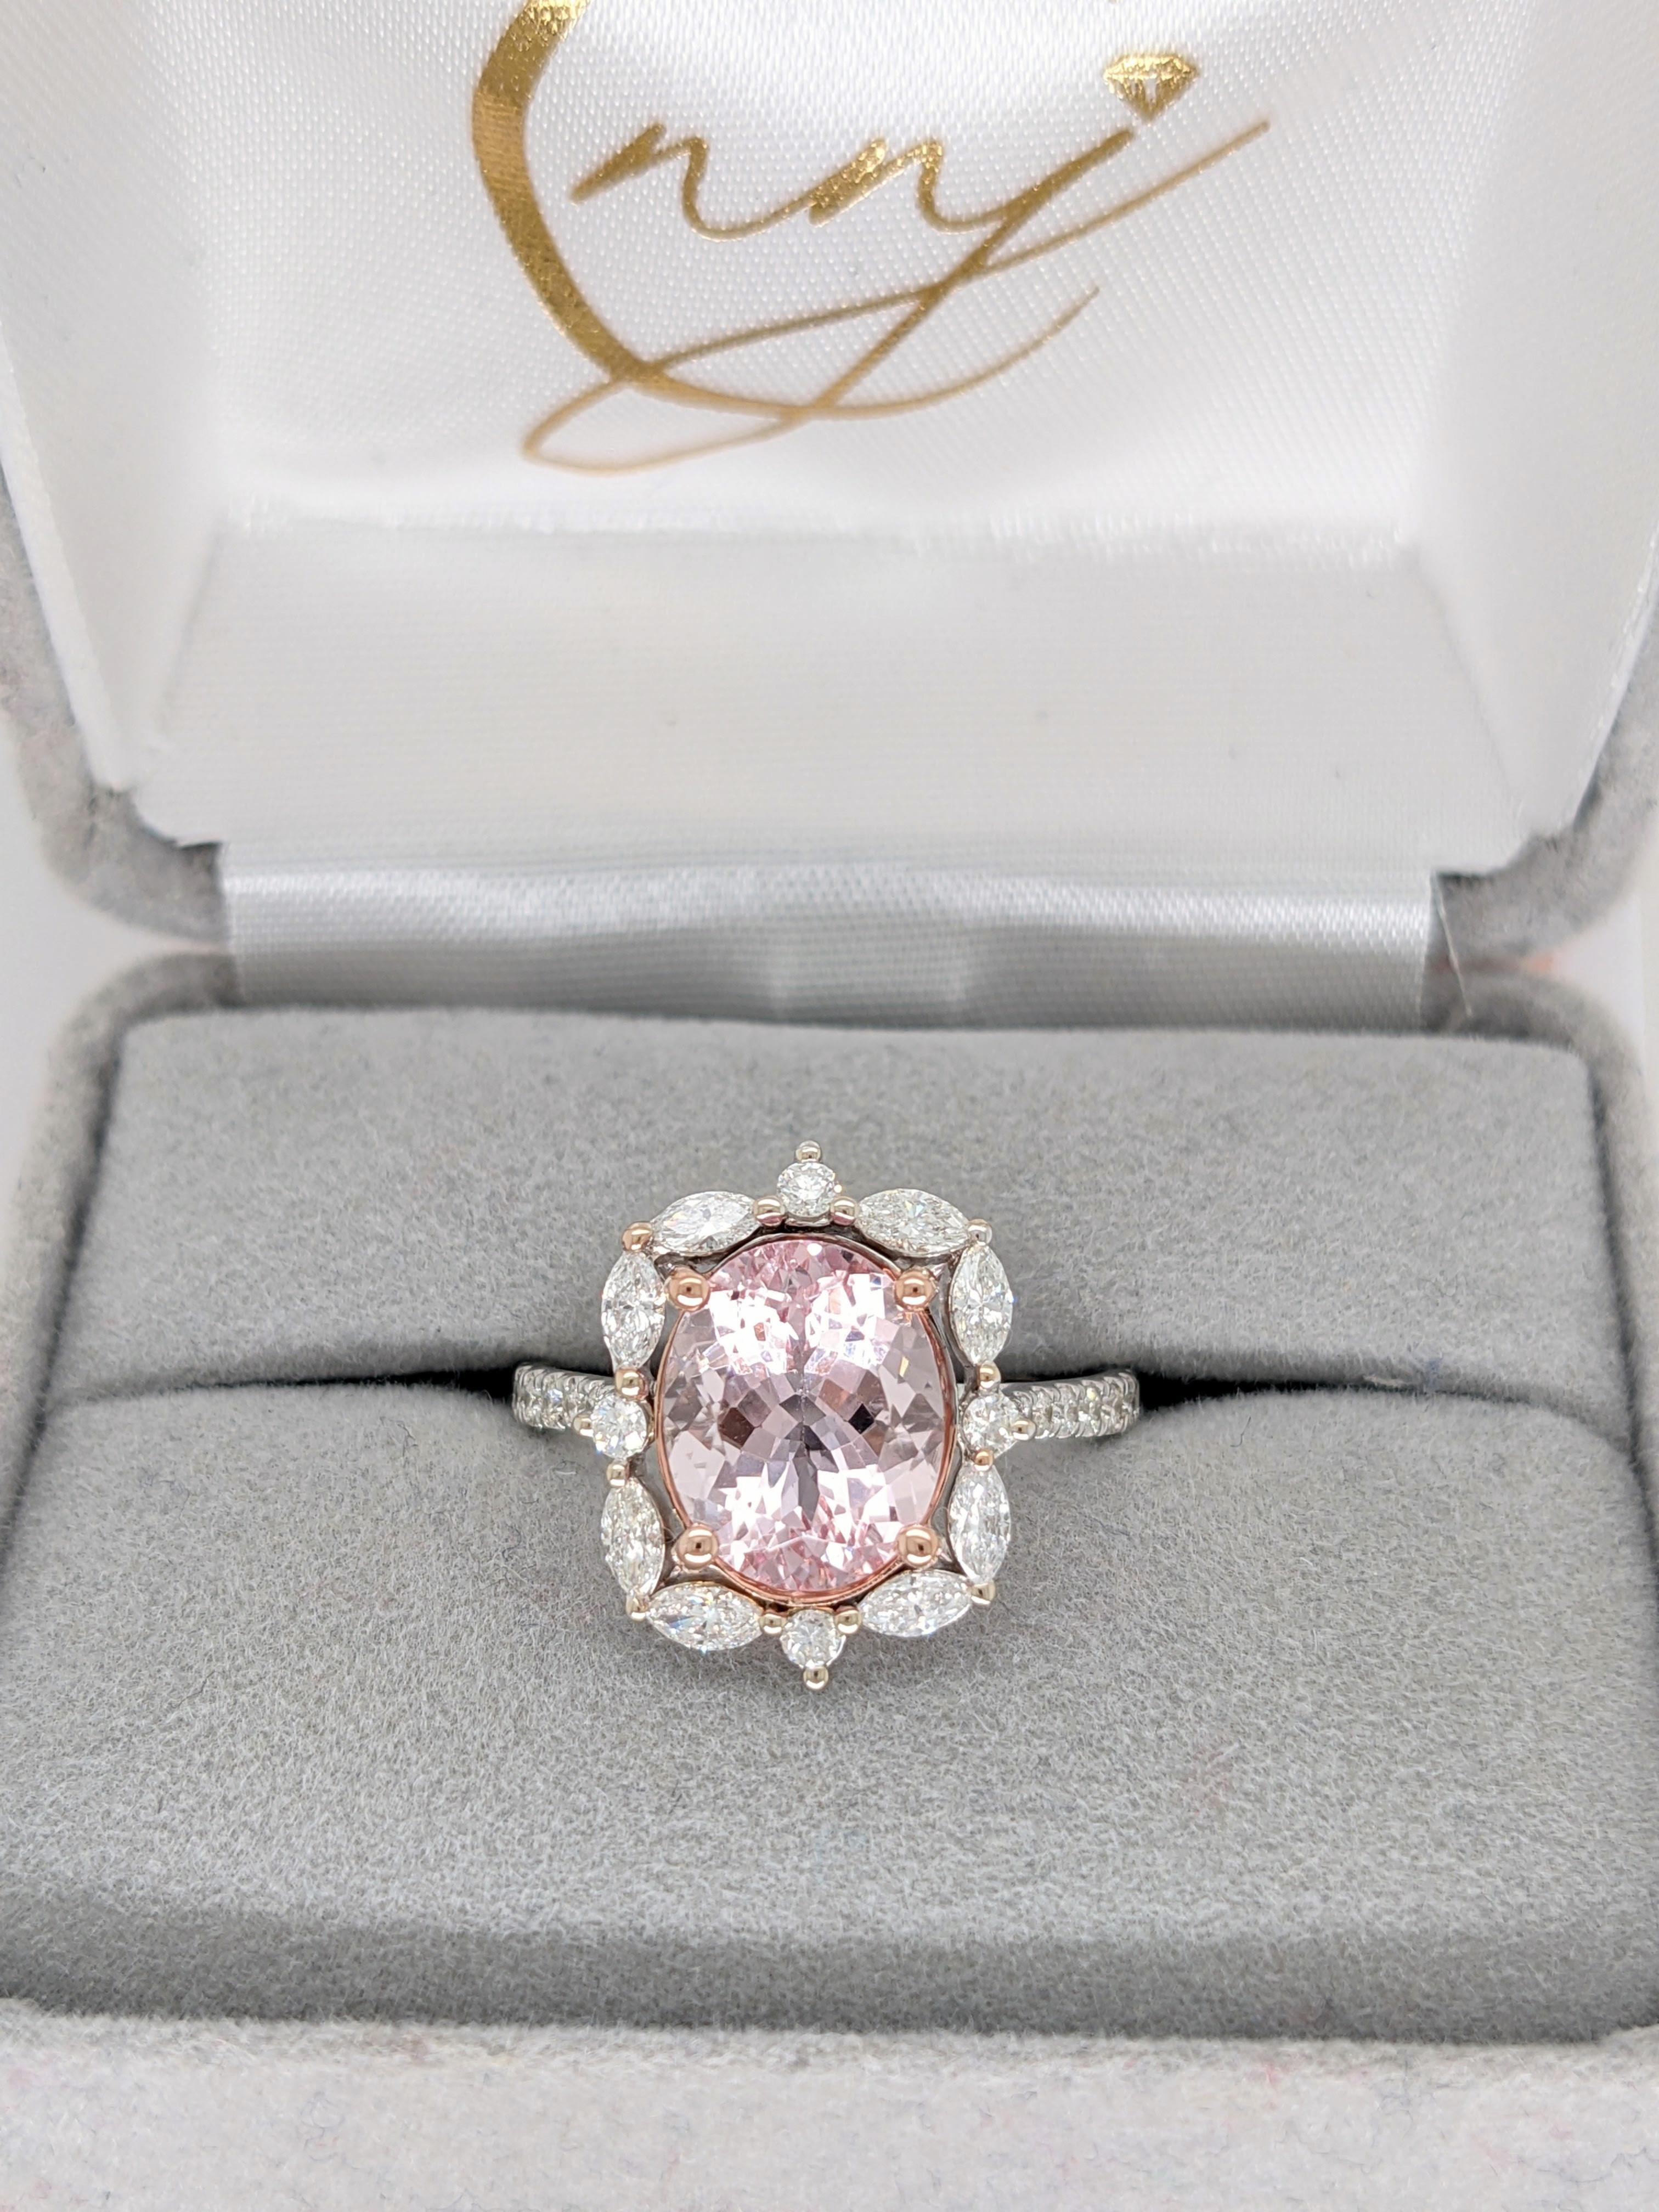 3 ct Pink Morganite and Diamond Ring in Solid 14K Dual White/Rose Gold Oval 11x9 2